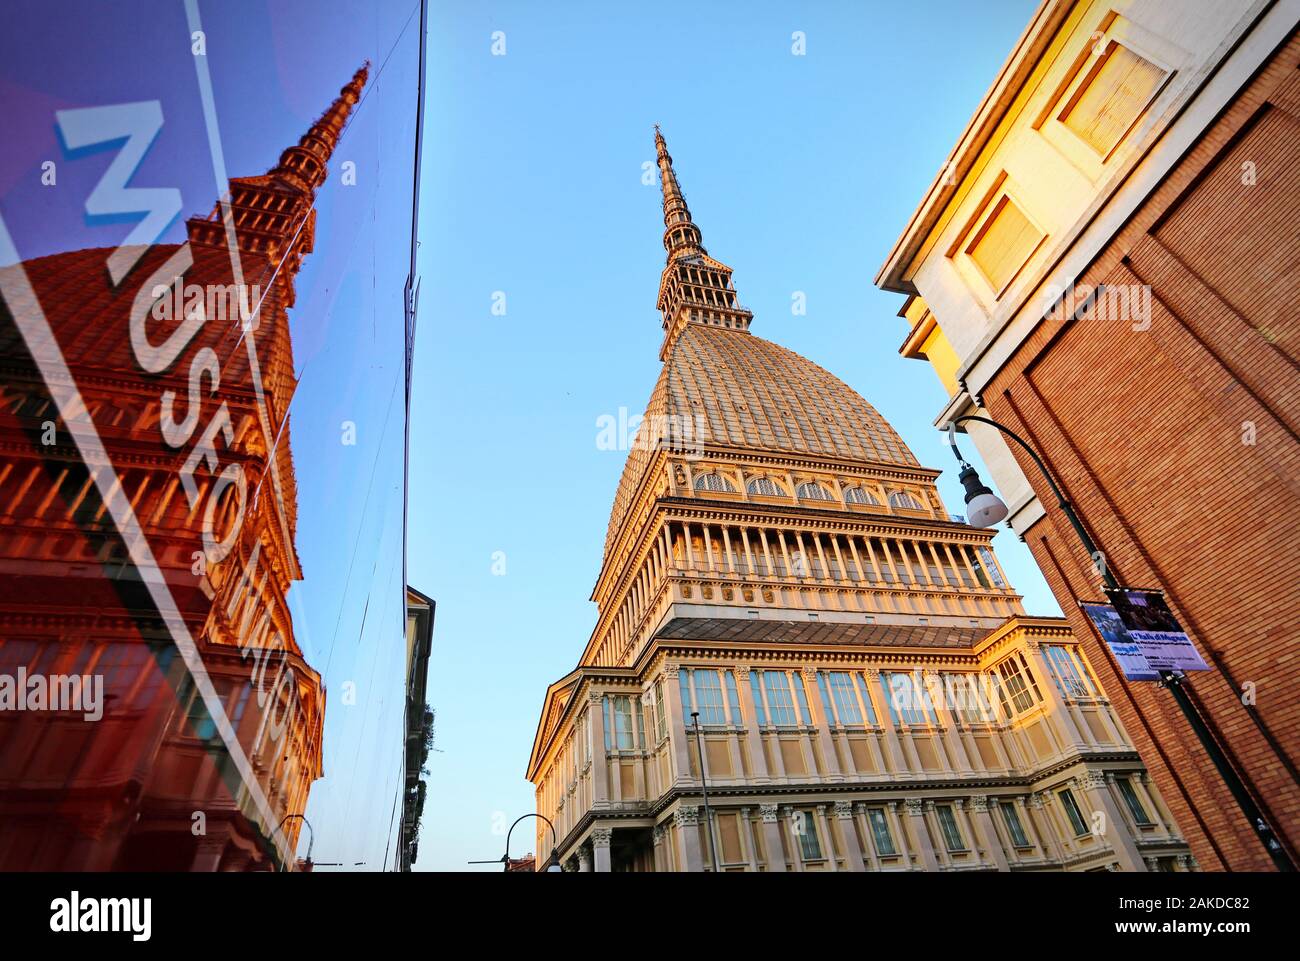 The Mole Antonelliana is the symbol of the city of Turin and inside it houses the National Museum of Cinema. Turin, Italy - April 2018 Stock Photo